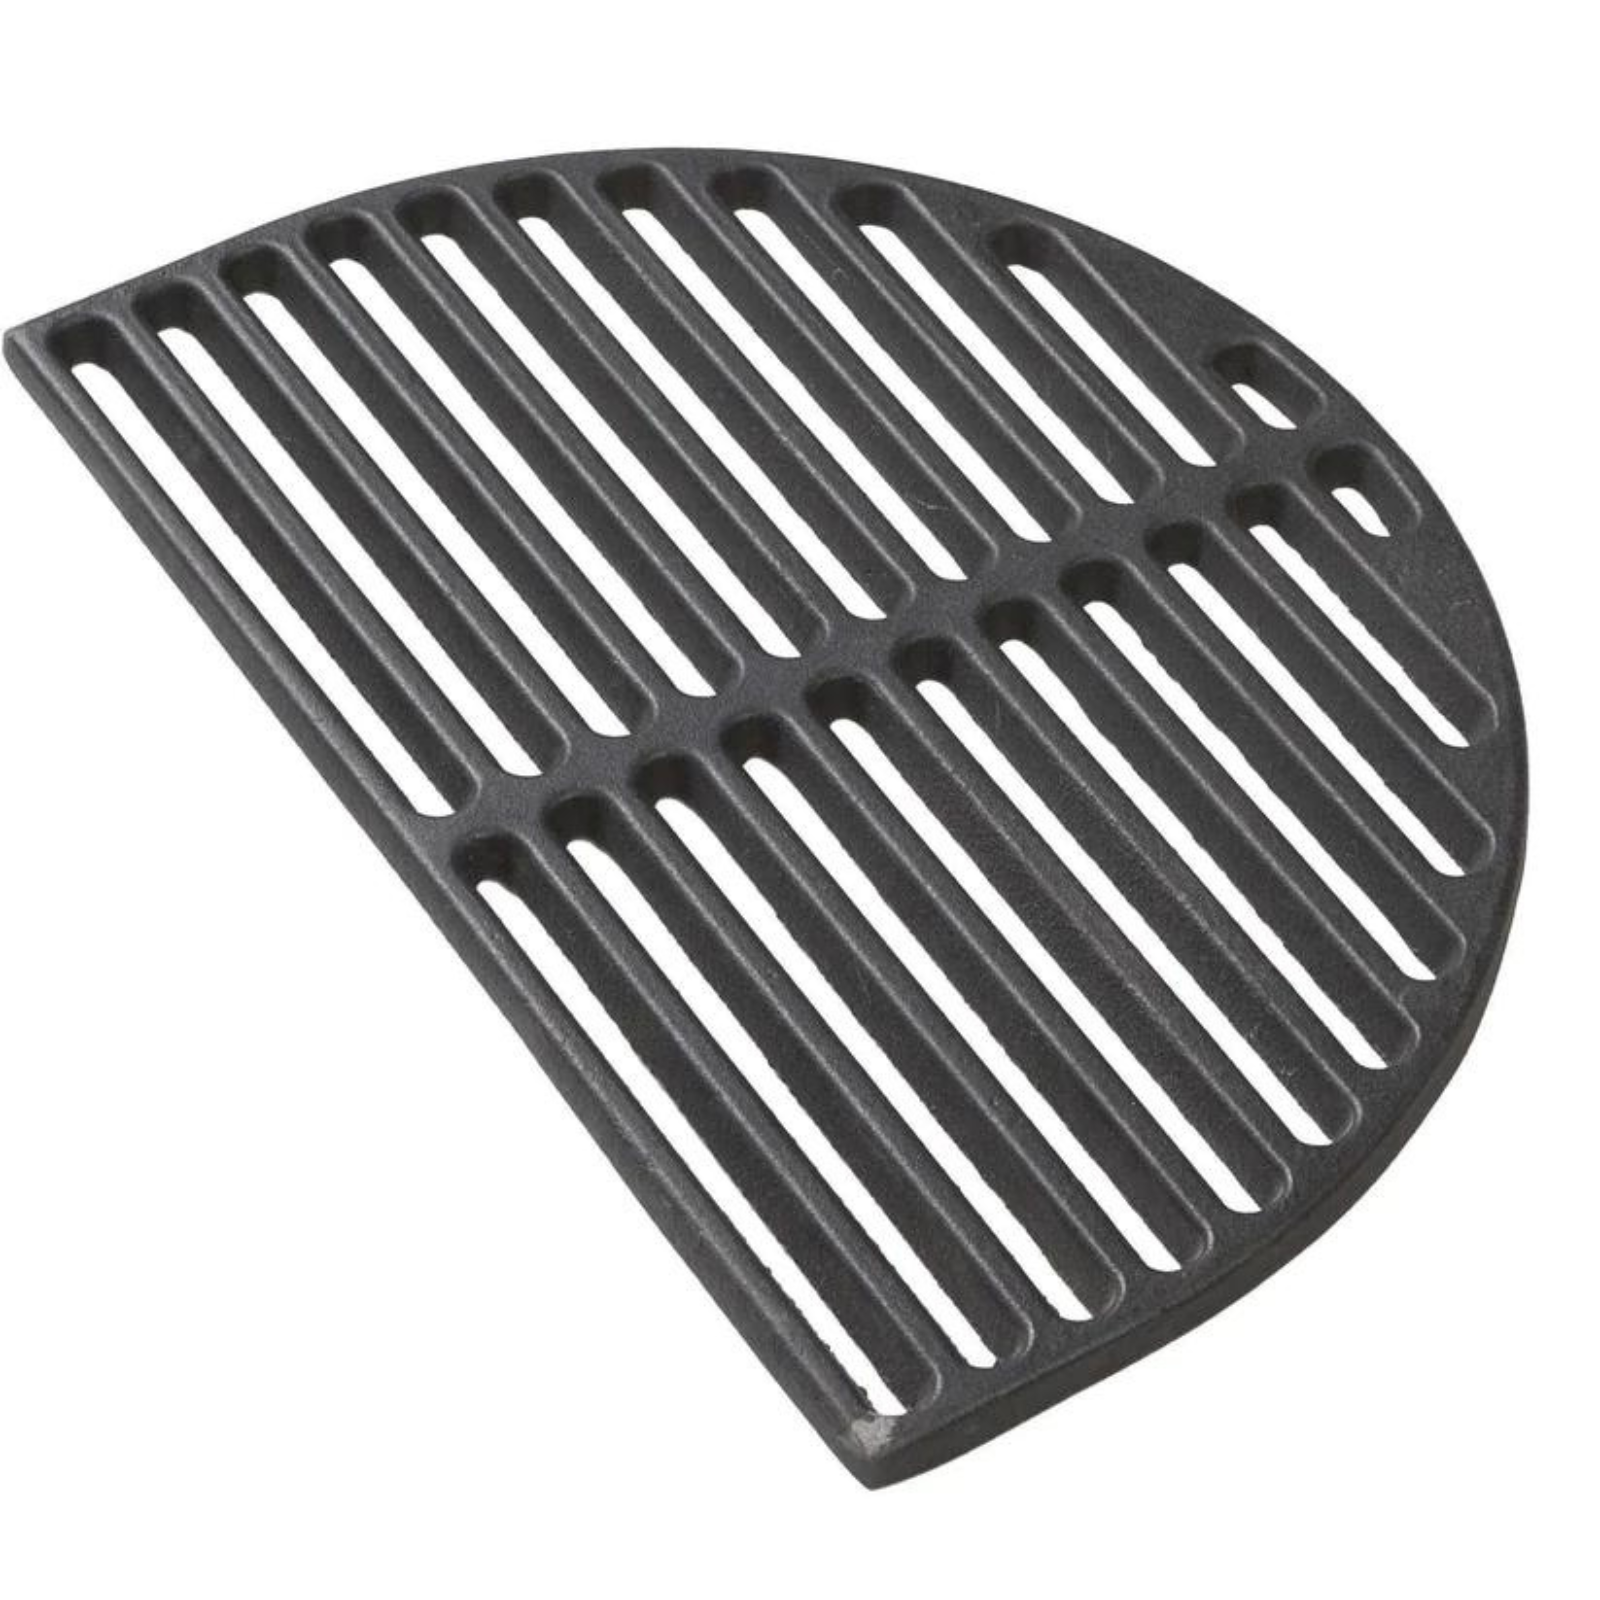 Primo Searing Grate for LG 300